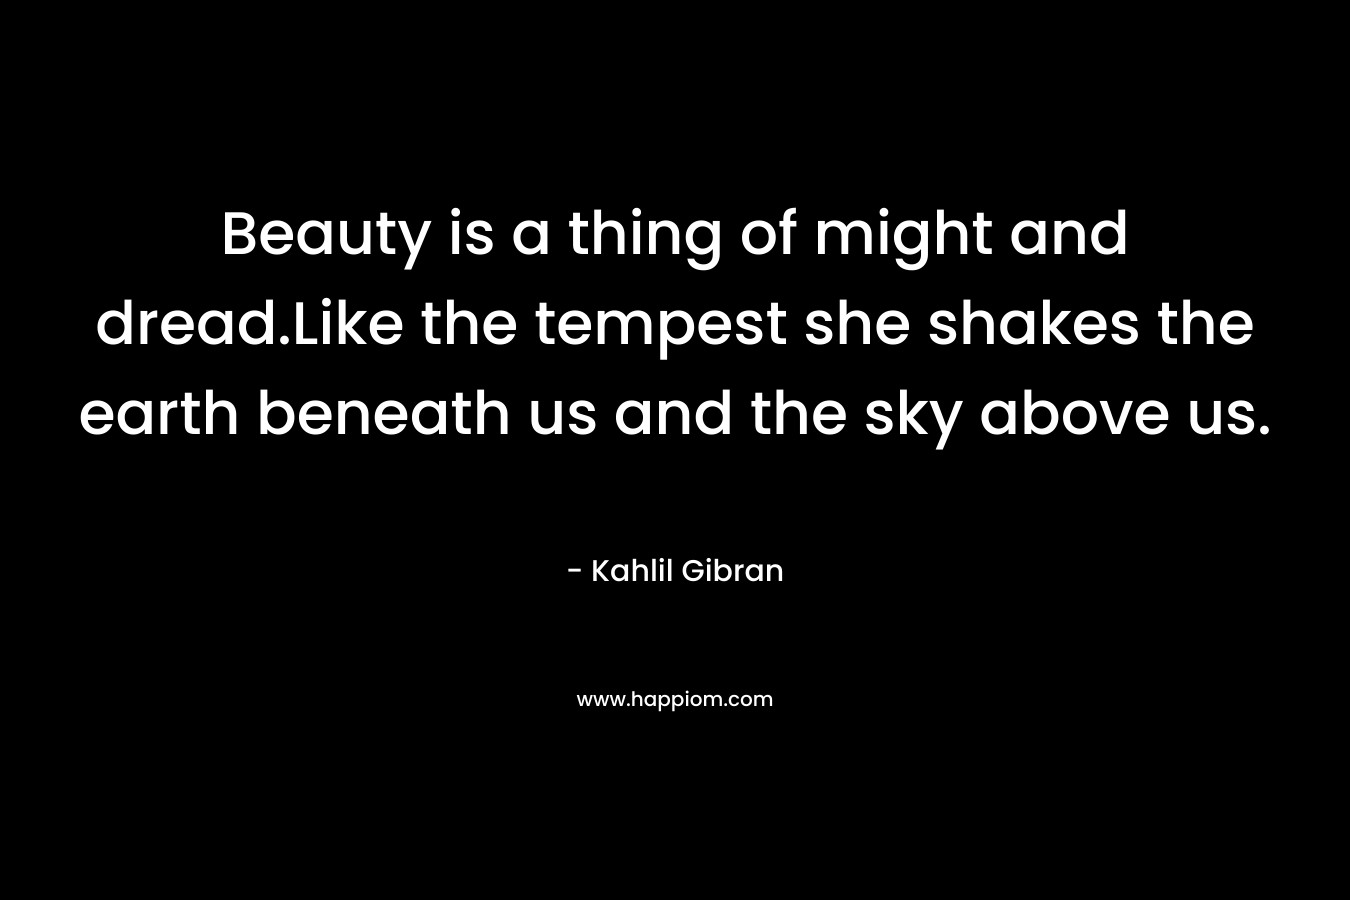 Beauty is a thing of might and dread.Like the tempest she shakes the earth beneath us and the sky above us. – Kahlil Gibran